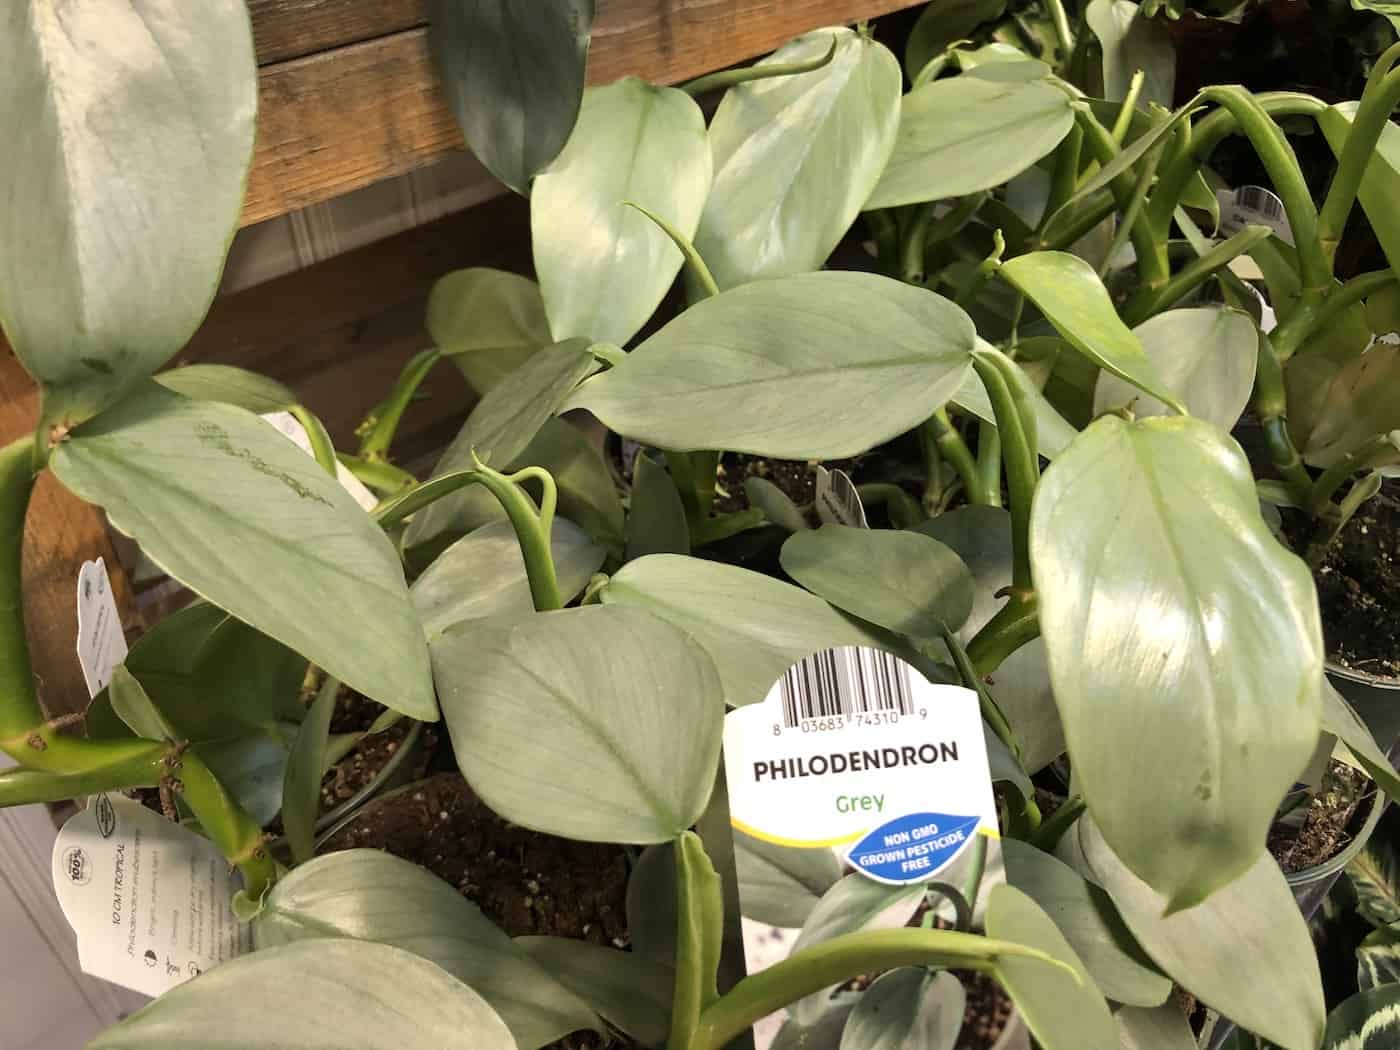 Philodendron gris